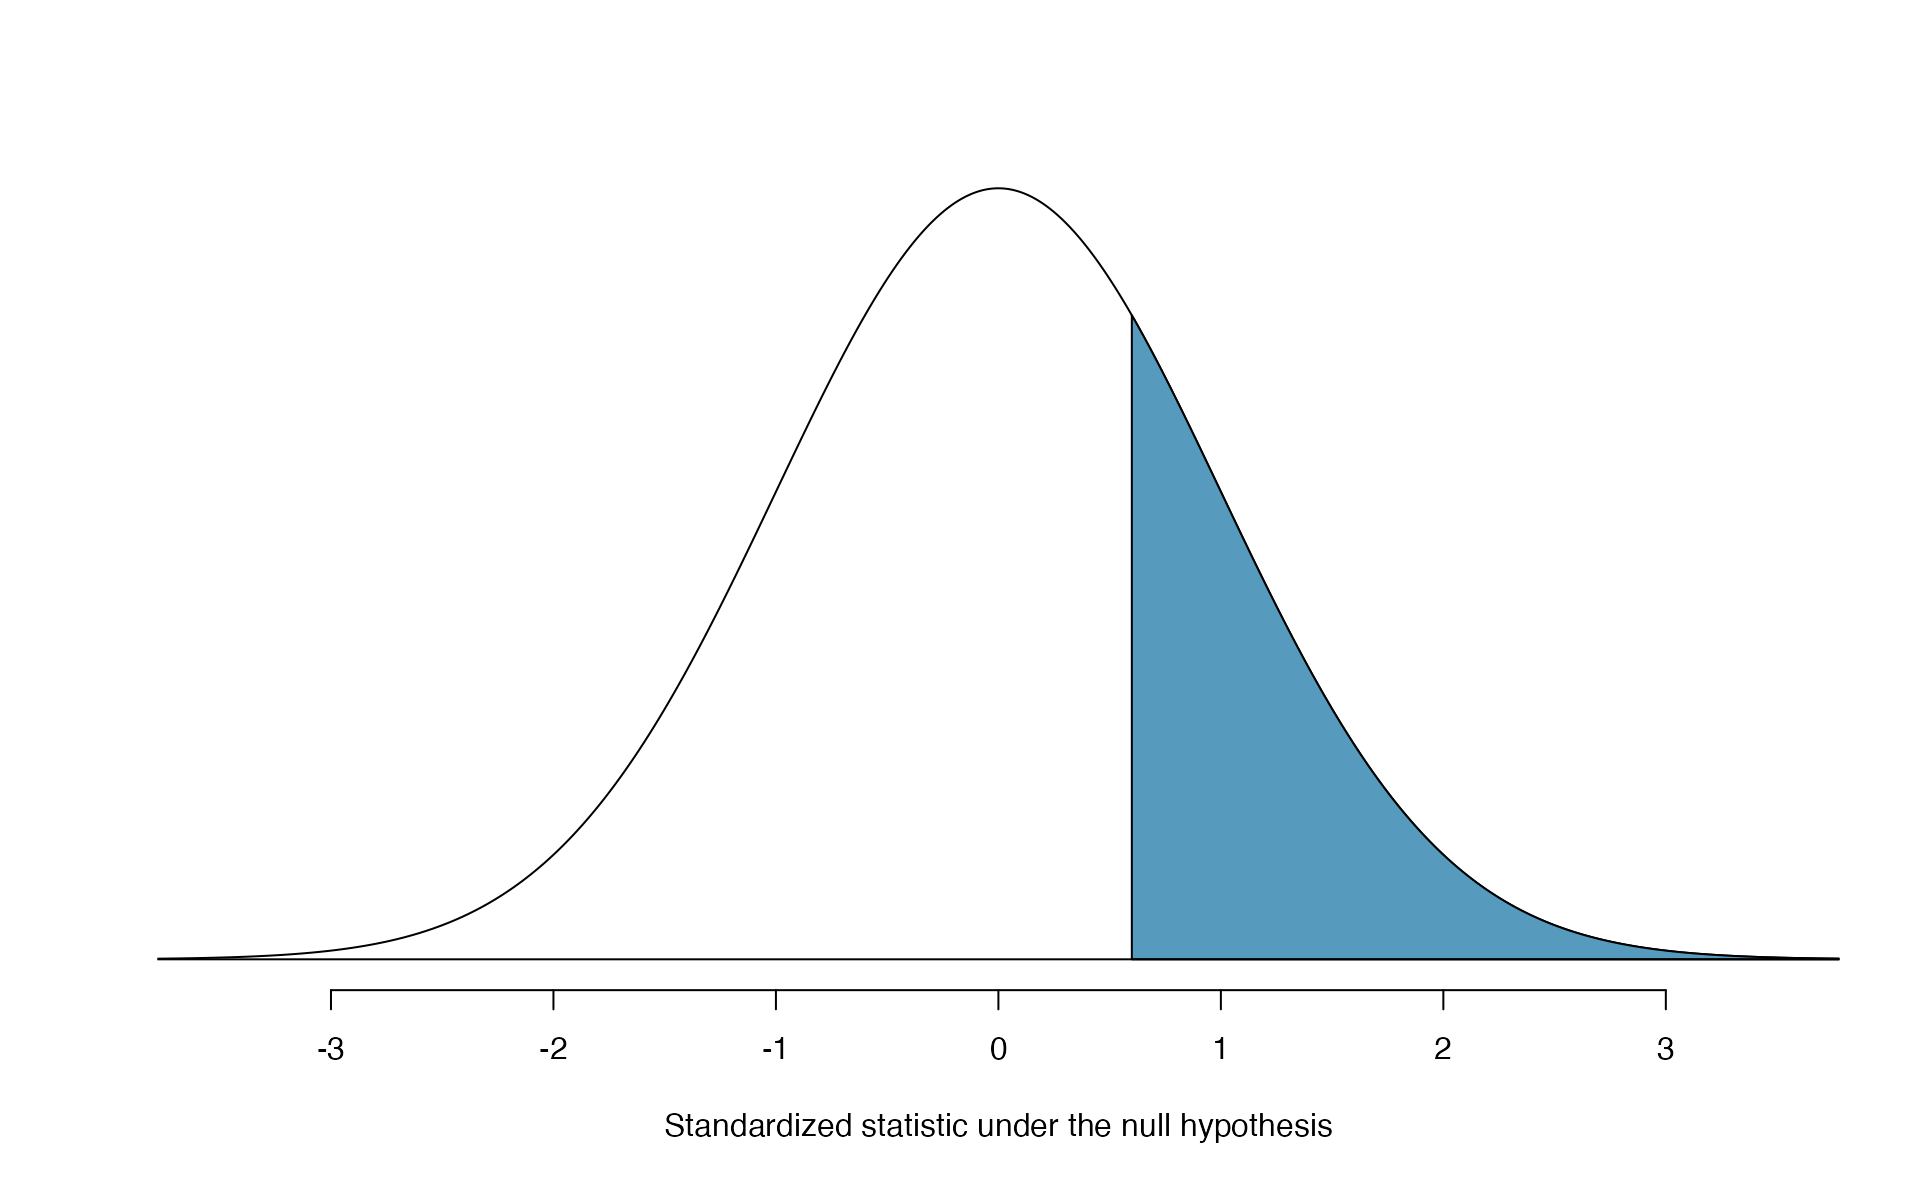 Approximate sampling distribution of \(Z\) across all possible samples assuming \(\pi = 0.50\). The shaded area represents the p-value corresponding to an observed standardized statistic of 0.59. Compare to Figure 5.17.